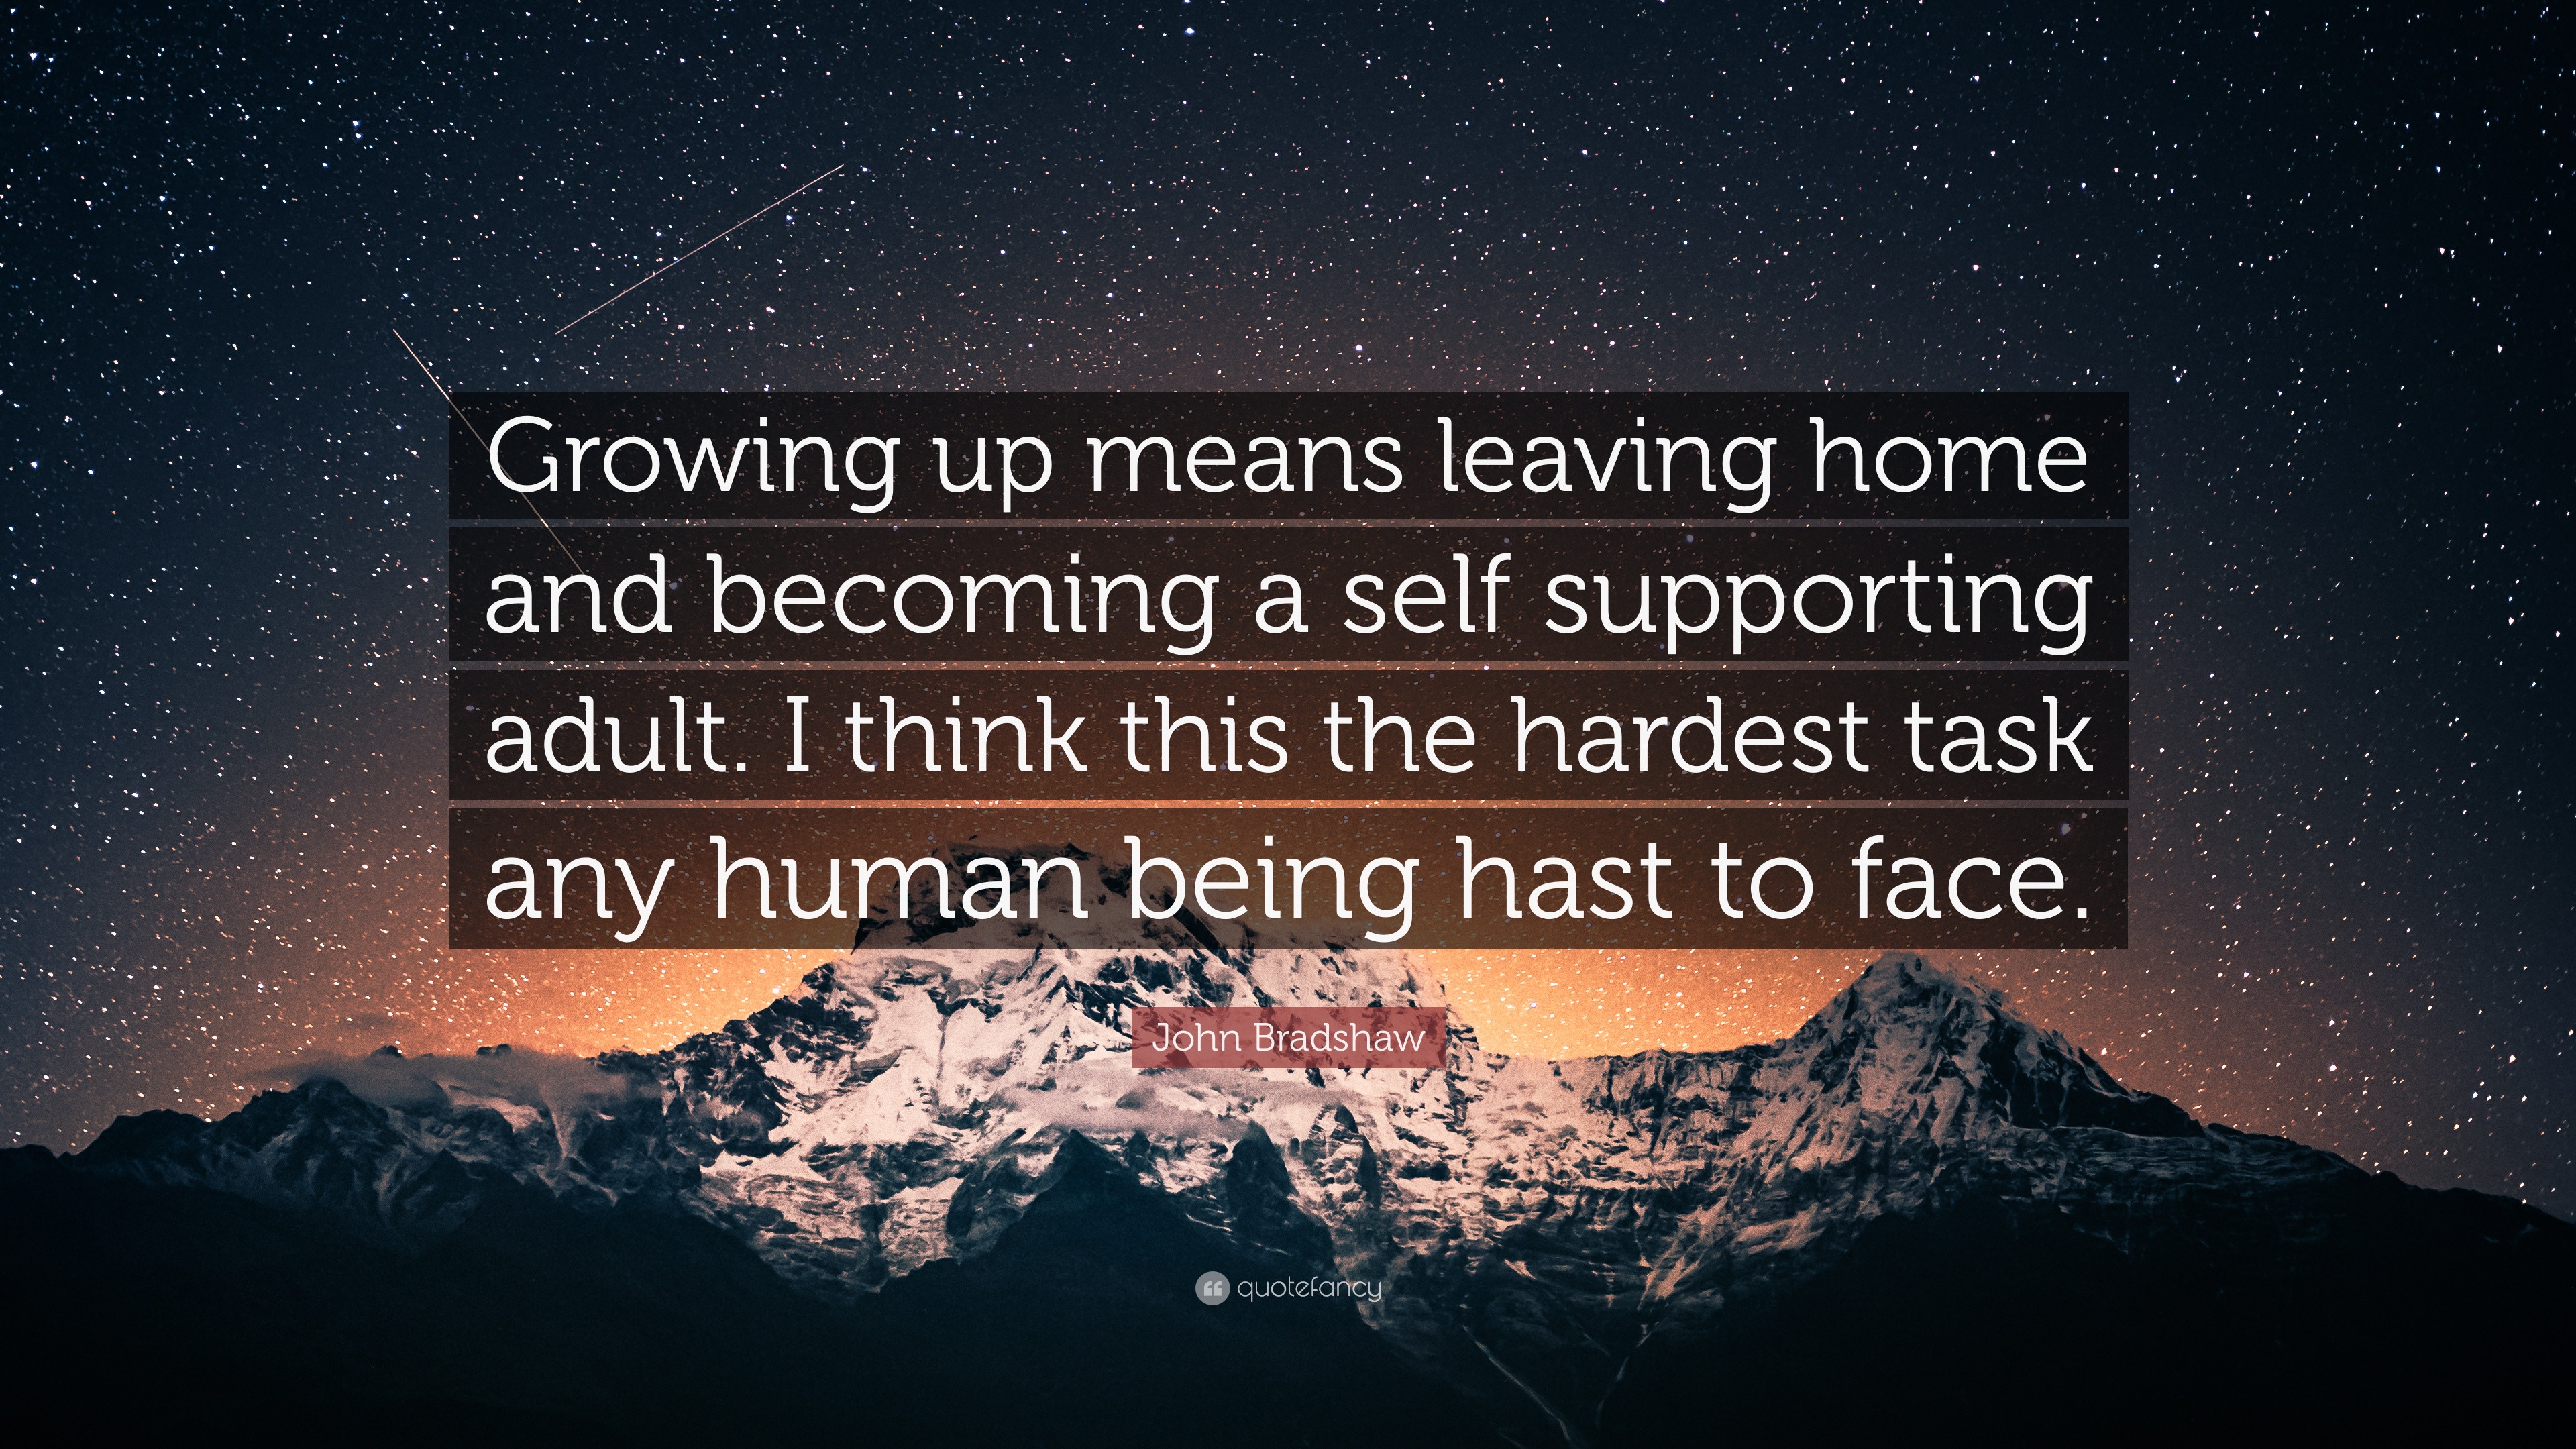 quotes about leaving town